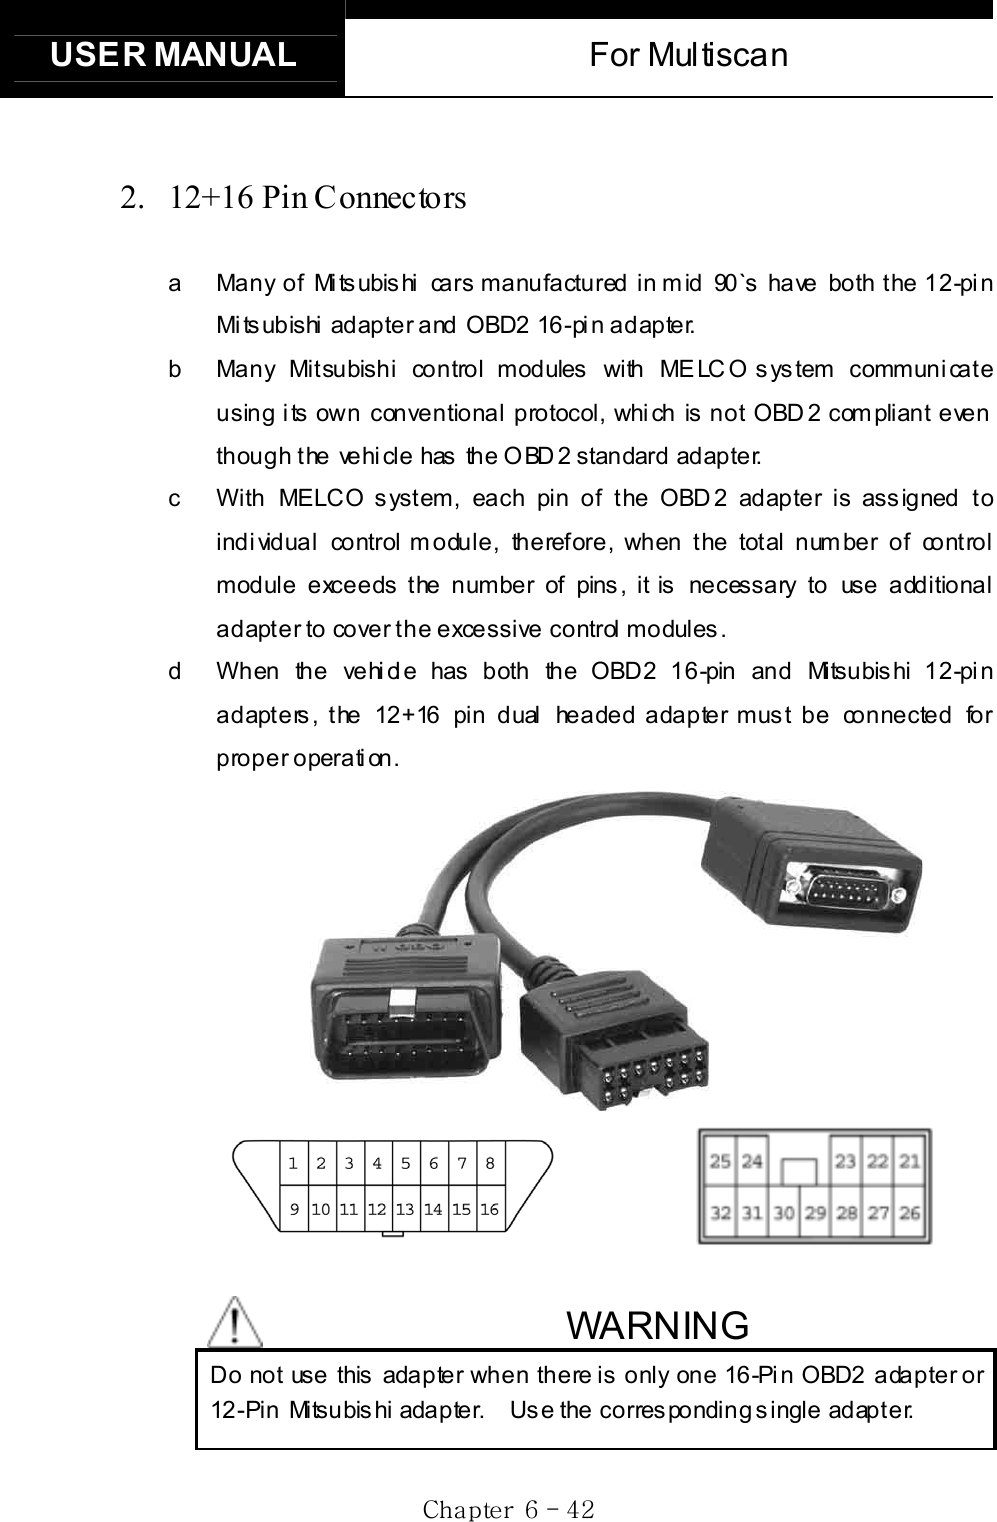 USER MANUAL  For Multiscan Gj G]G TG[YG2. 12+16 Pin Connectors a  Many of Mitsubishi cars manufactured in mid 90`s have both the 12-pin Mitsubishi adapter and OBD2 16-pin adapter.   b  Many Mitsubishi control modules with MELCO system communicate using its own conventional protocol, which is not OBD2 compliant even though t he vehi cle has  the O BD 2 standard adapter.     c  With MELCO s yst em, each pin of the OBD 2 adapter is ass igned to individual control module, therefore, when the total number of control module exceeds the number of pins, it is necessary to use additional ad apt e r to co ve r t h e  e xce ssive co ntrol  mo dules .    d  When the vehicle has both the OBD2 16-pin and Mitsubishi 12-pin adapters, the 12+16 pin dual headed adapter must be connected for proper operation.              WARNING Do not use this adapter when there is only one 16-Pin OBD2 adapter or 12-Pin Mitsubis hi adapter.    Us e the corres ponding s ingle adapter. 